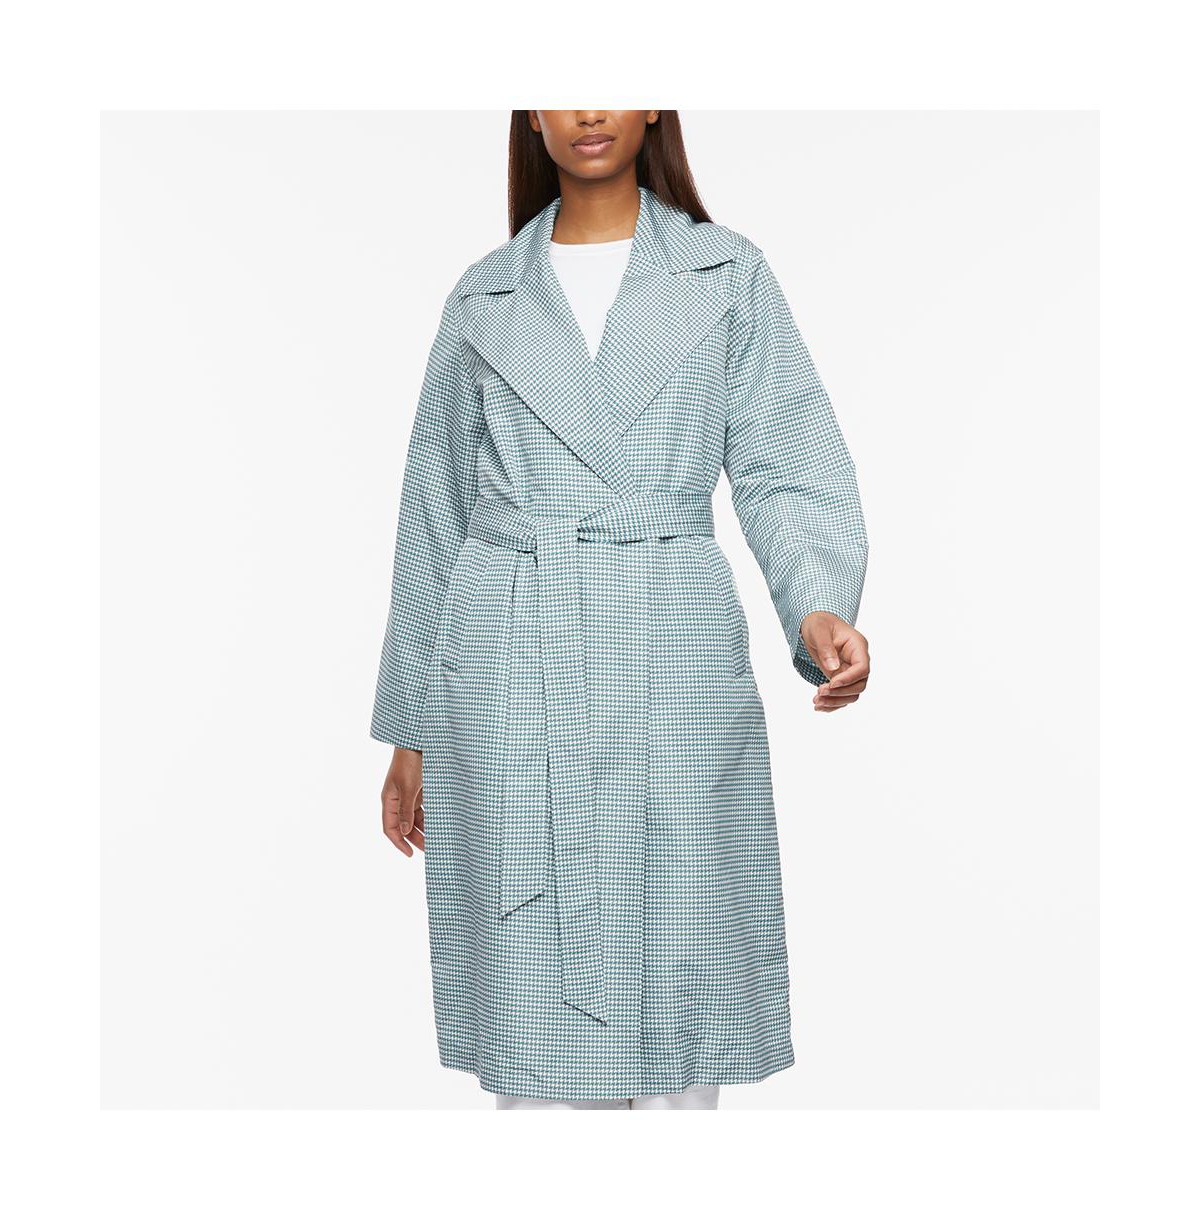 Hounds tooth Rain Trench Coat - Teal houndstooth